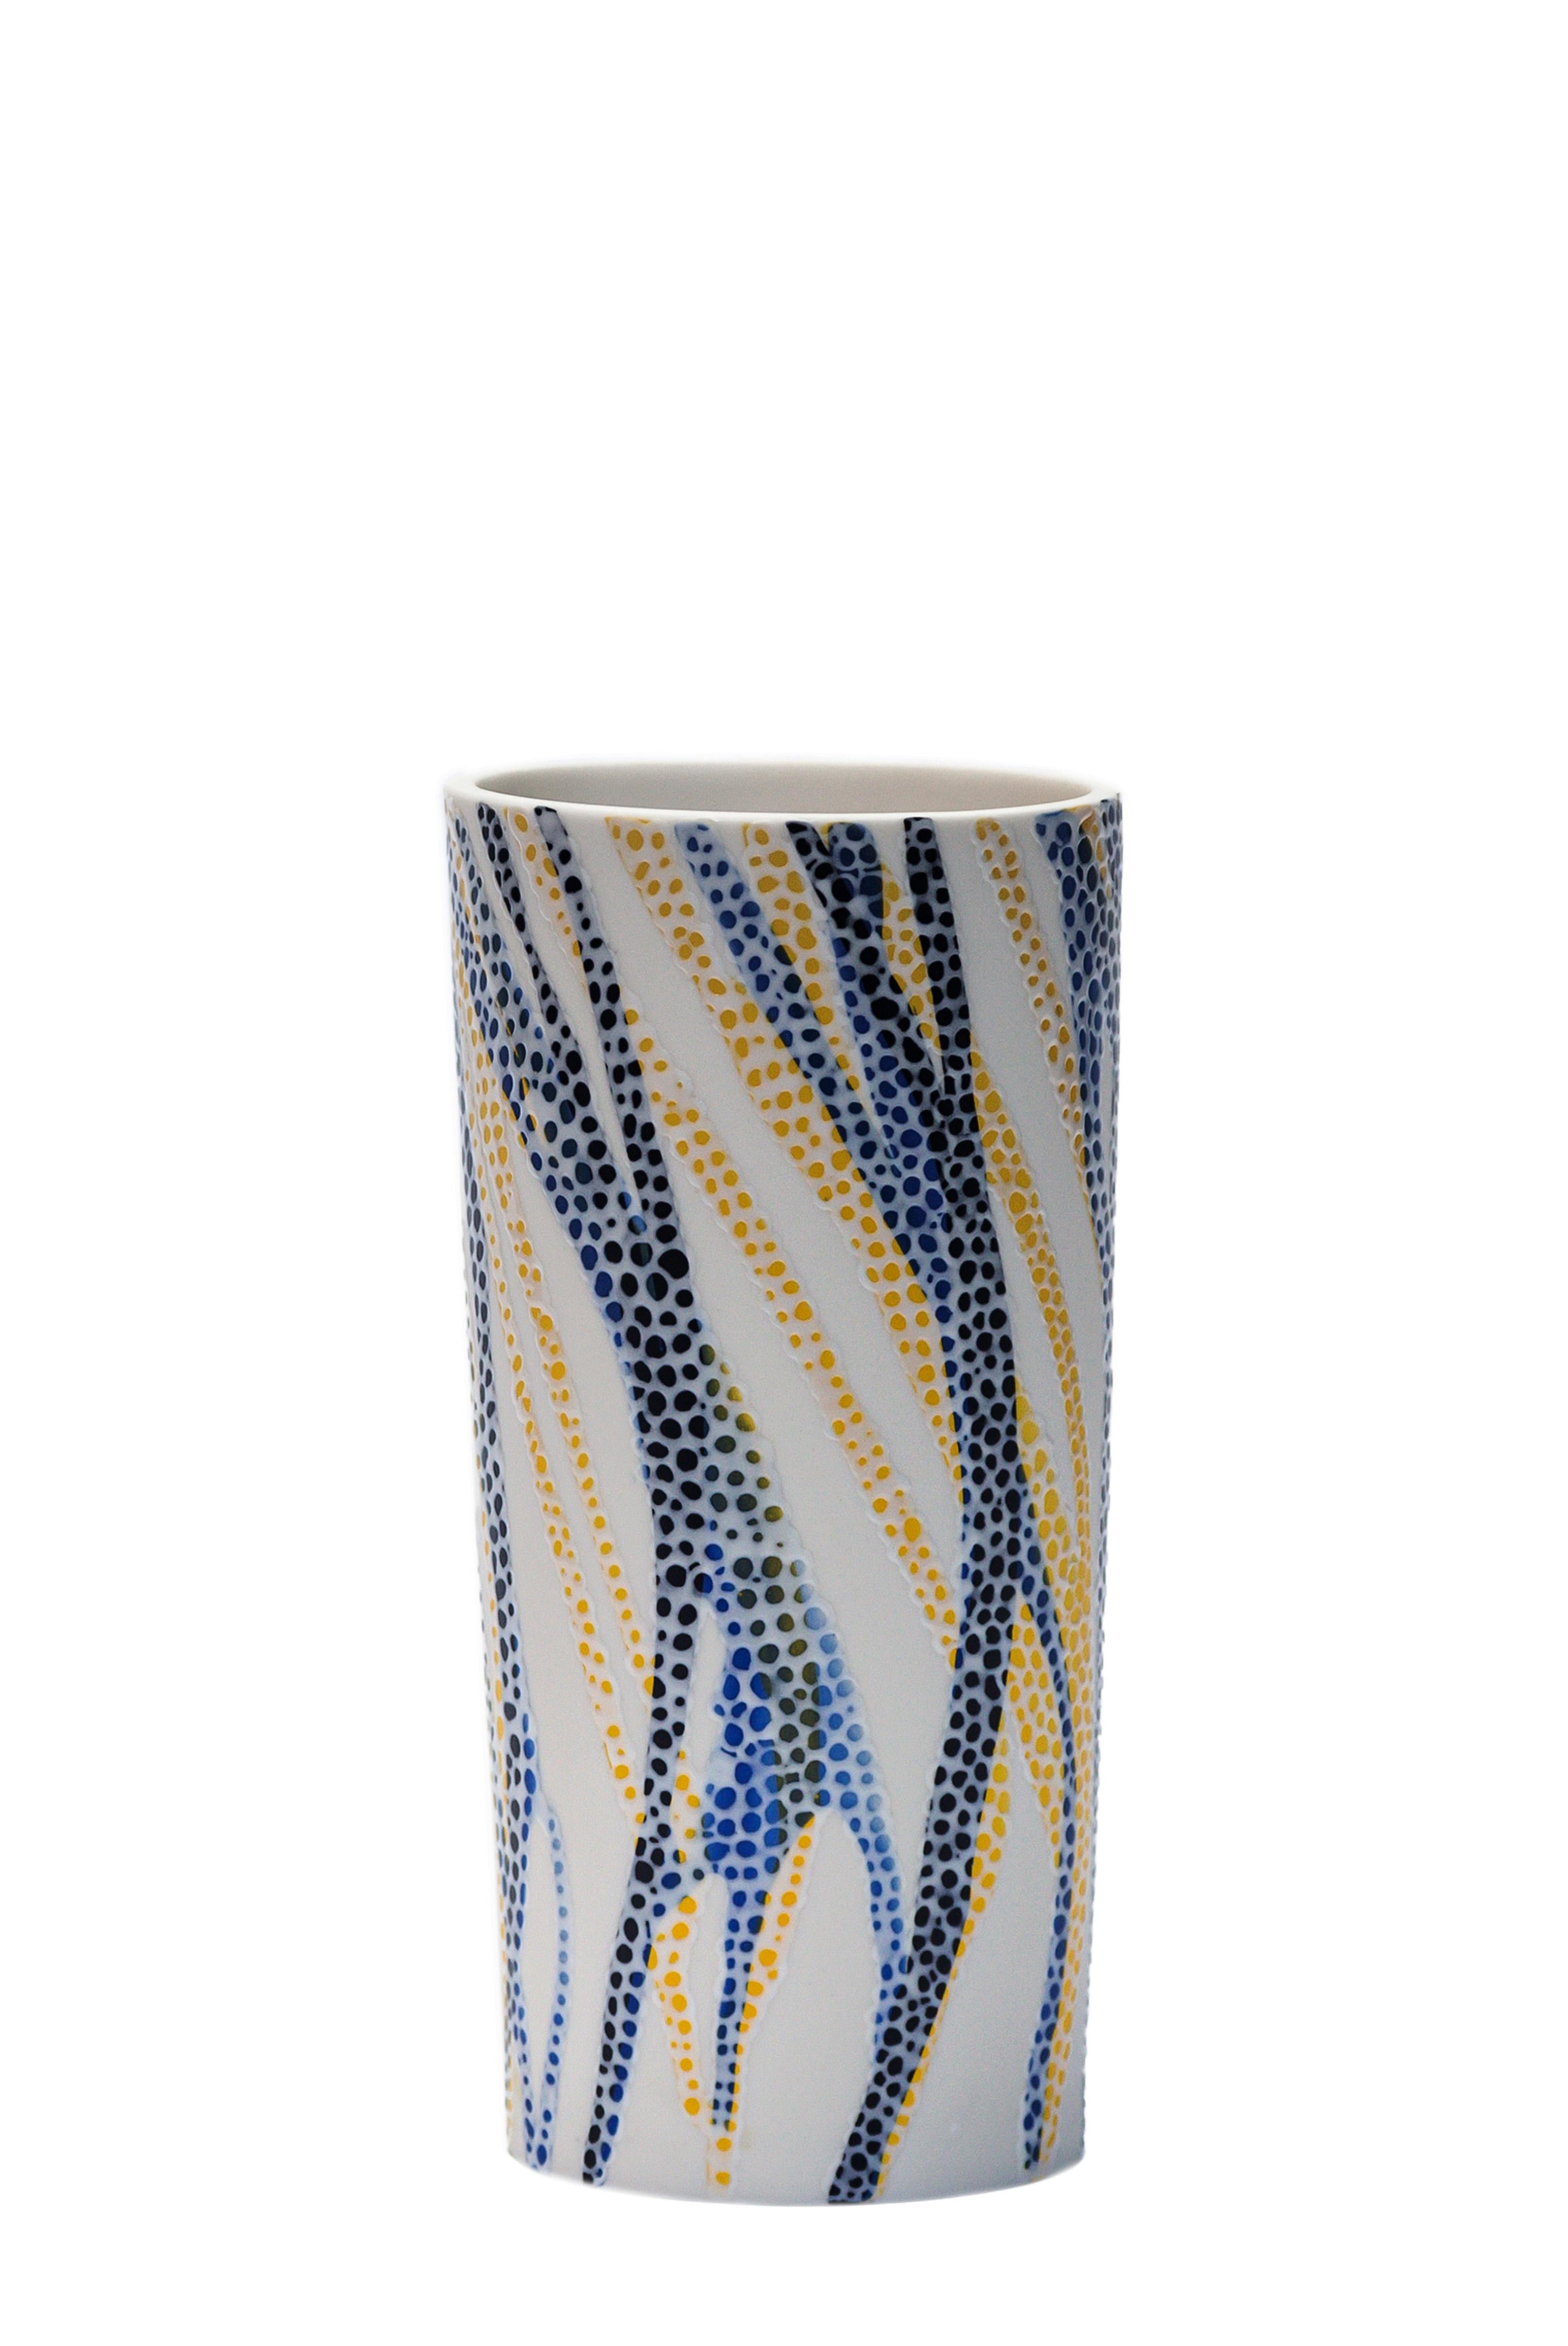 “Memory drops”, 2021 Porcelain vase by Eugenio Michelini - Parian ware, dripping stained slips, Satin and hand decorated with overglaze. Size = 10 x20 cm h
Unique piece handmade - 3 firings 

The focus of Eugenio Michelini (Italy, 1970) interest